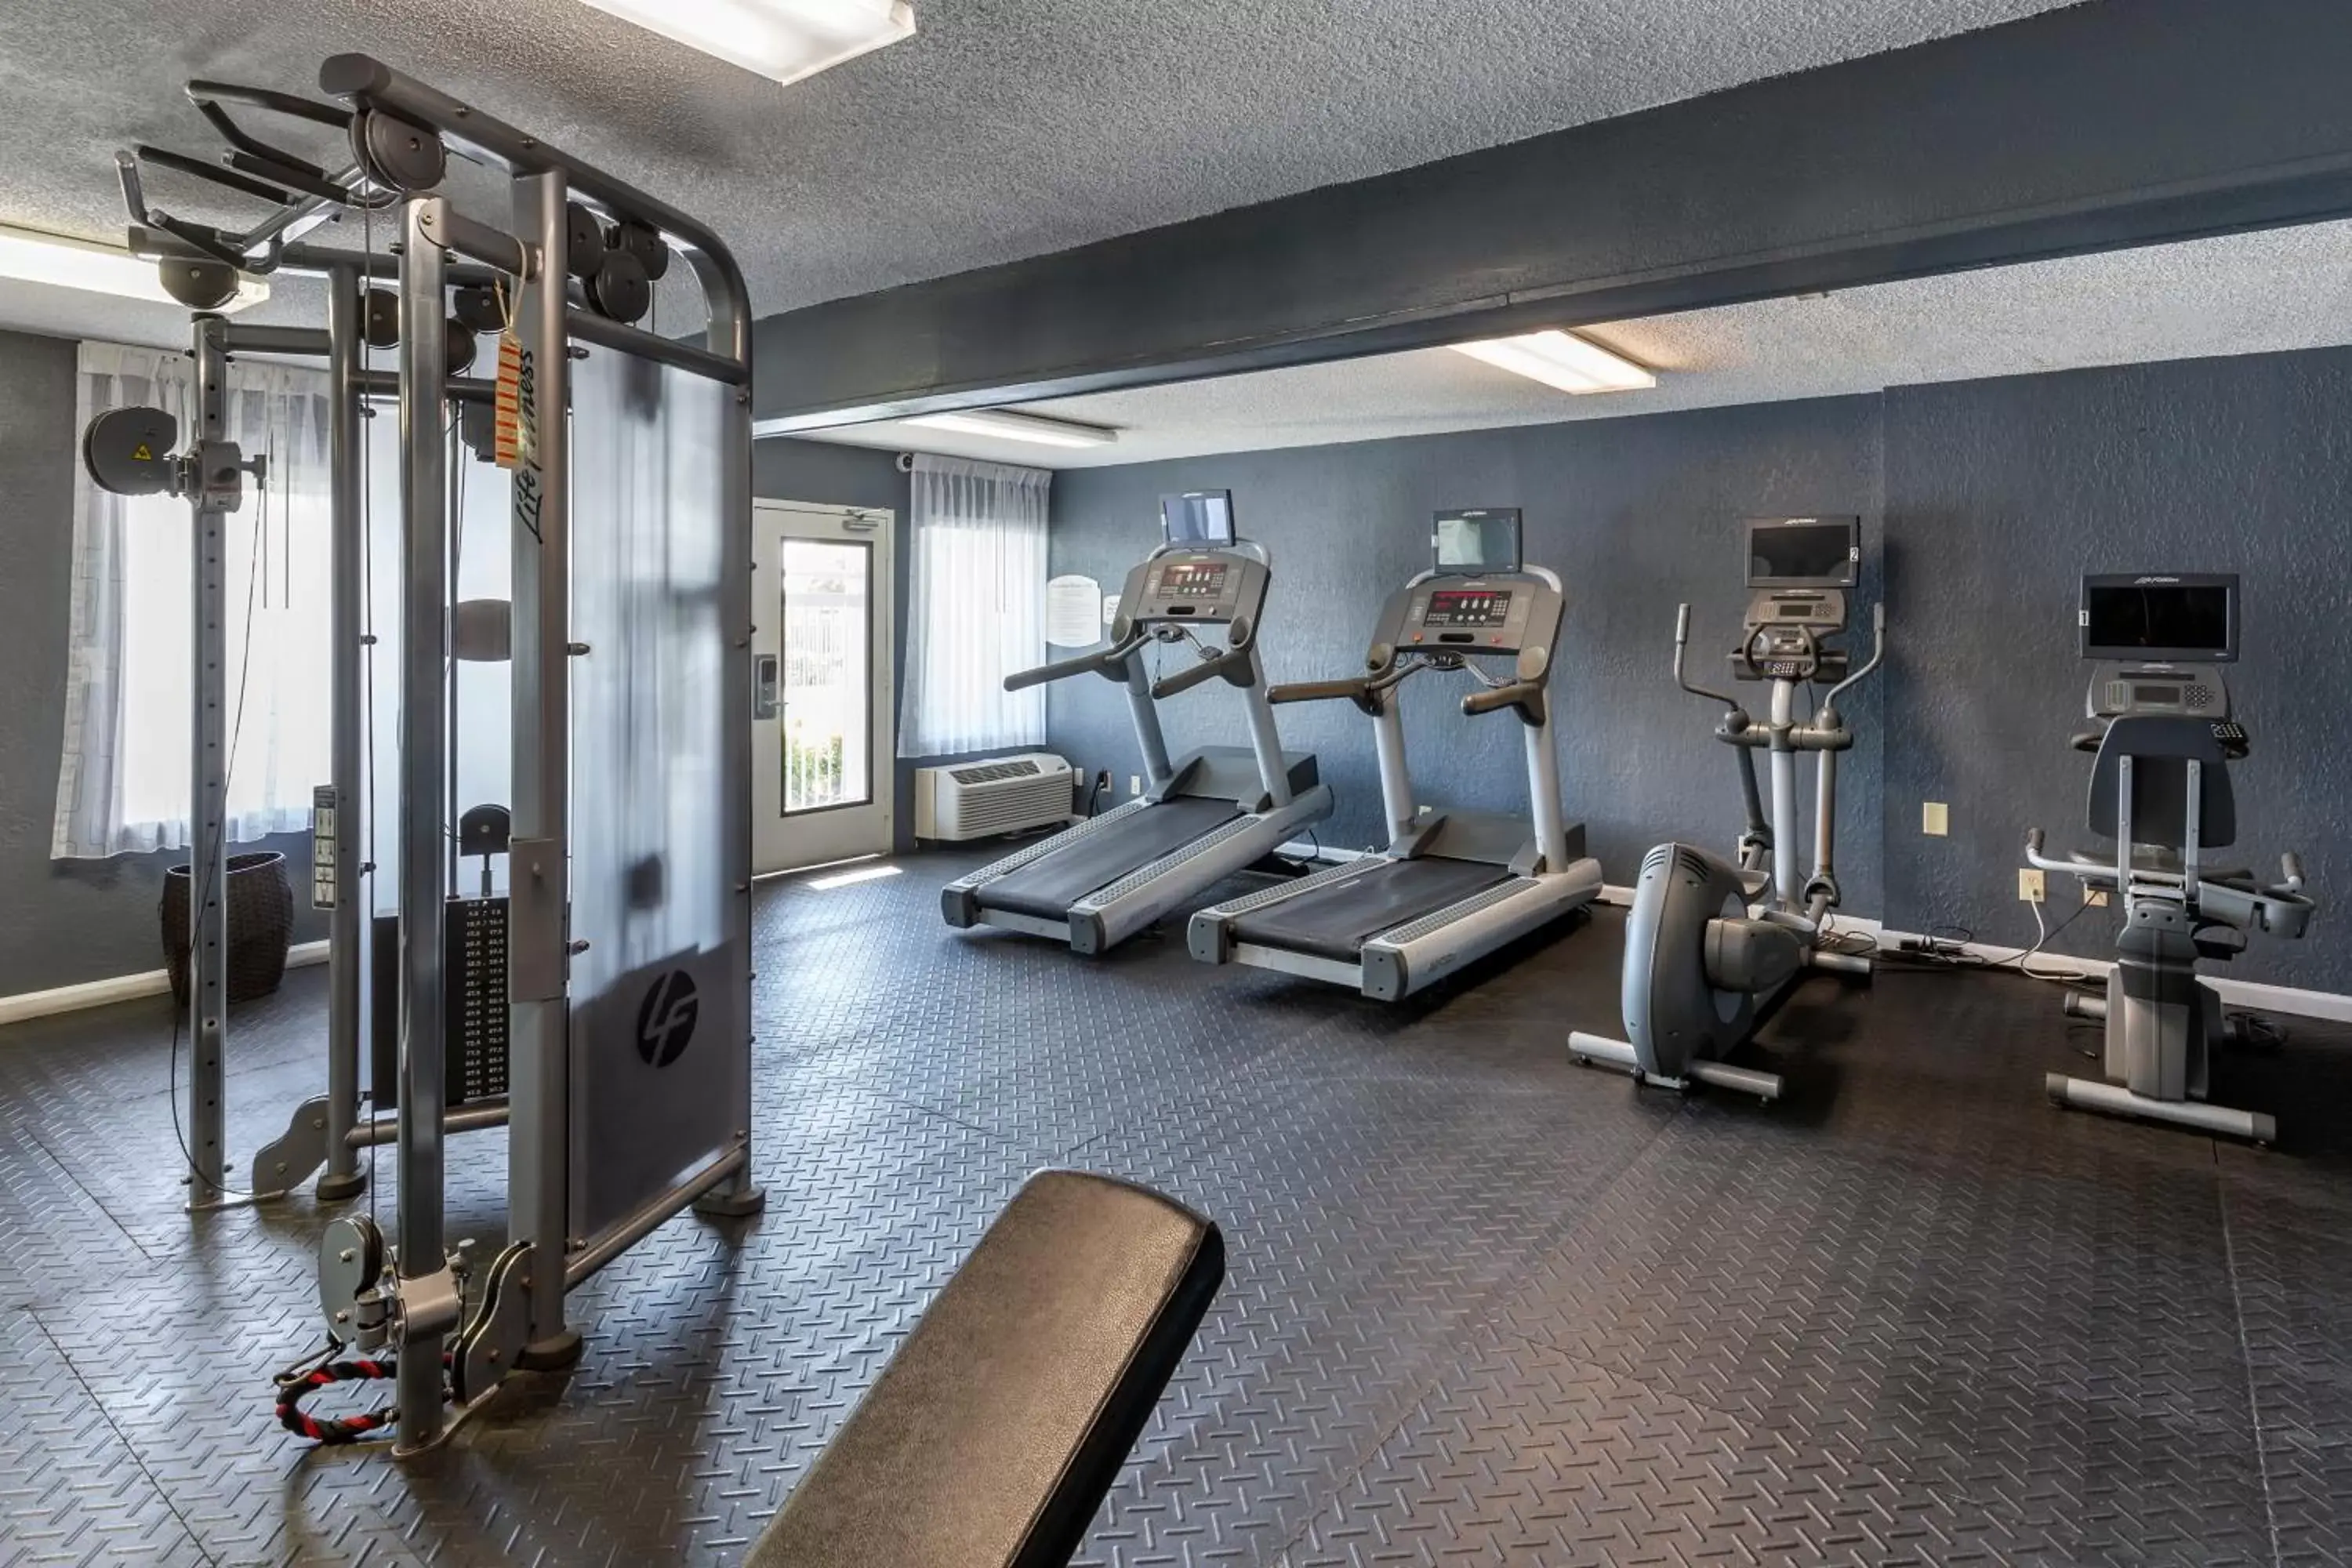 Fitness centre/facilities, Fitness Center/Facilities in Quality Inn Near Fort Liberty formerly Ft Bragg